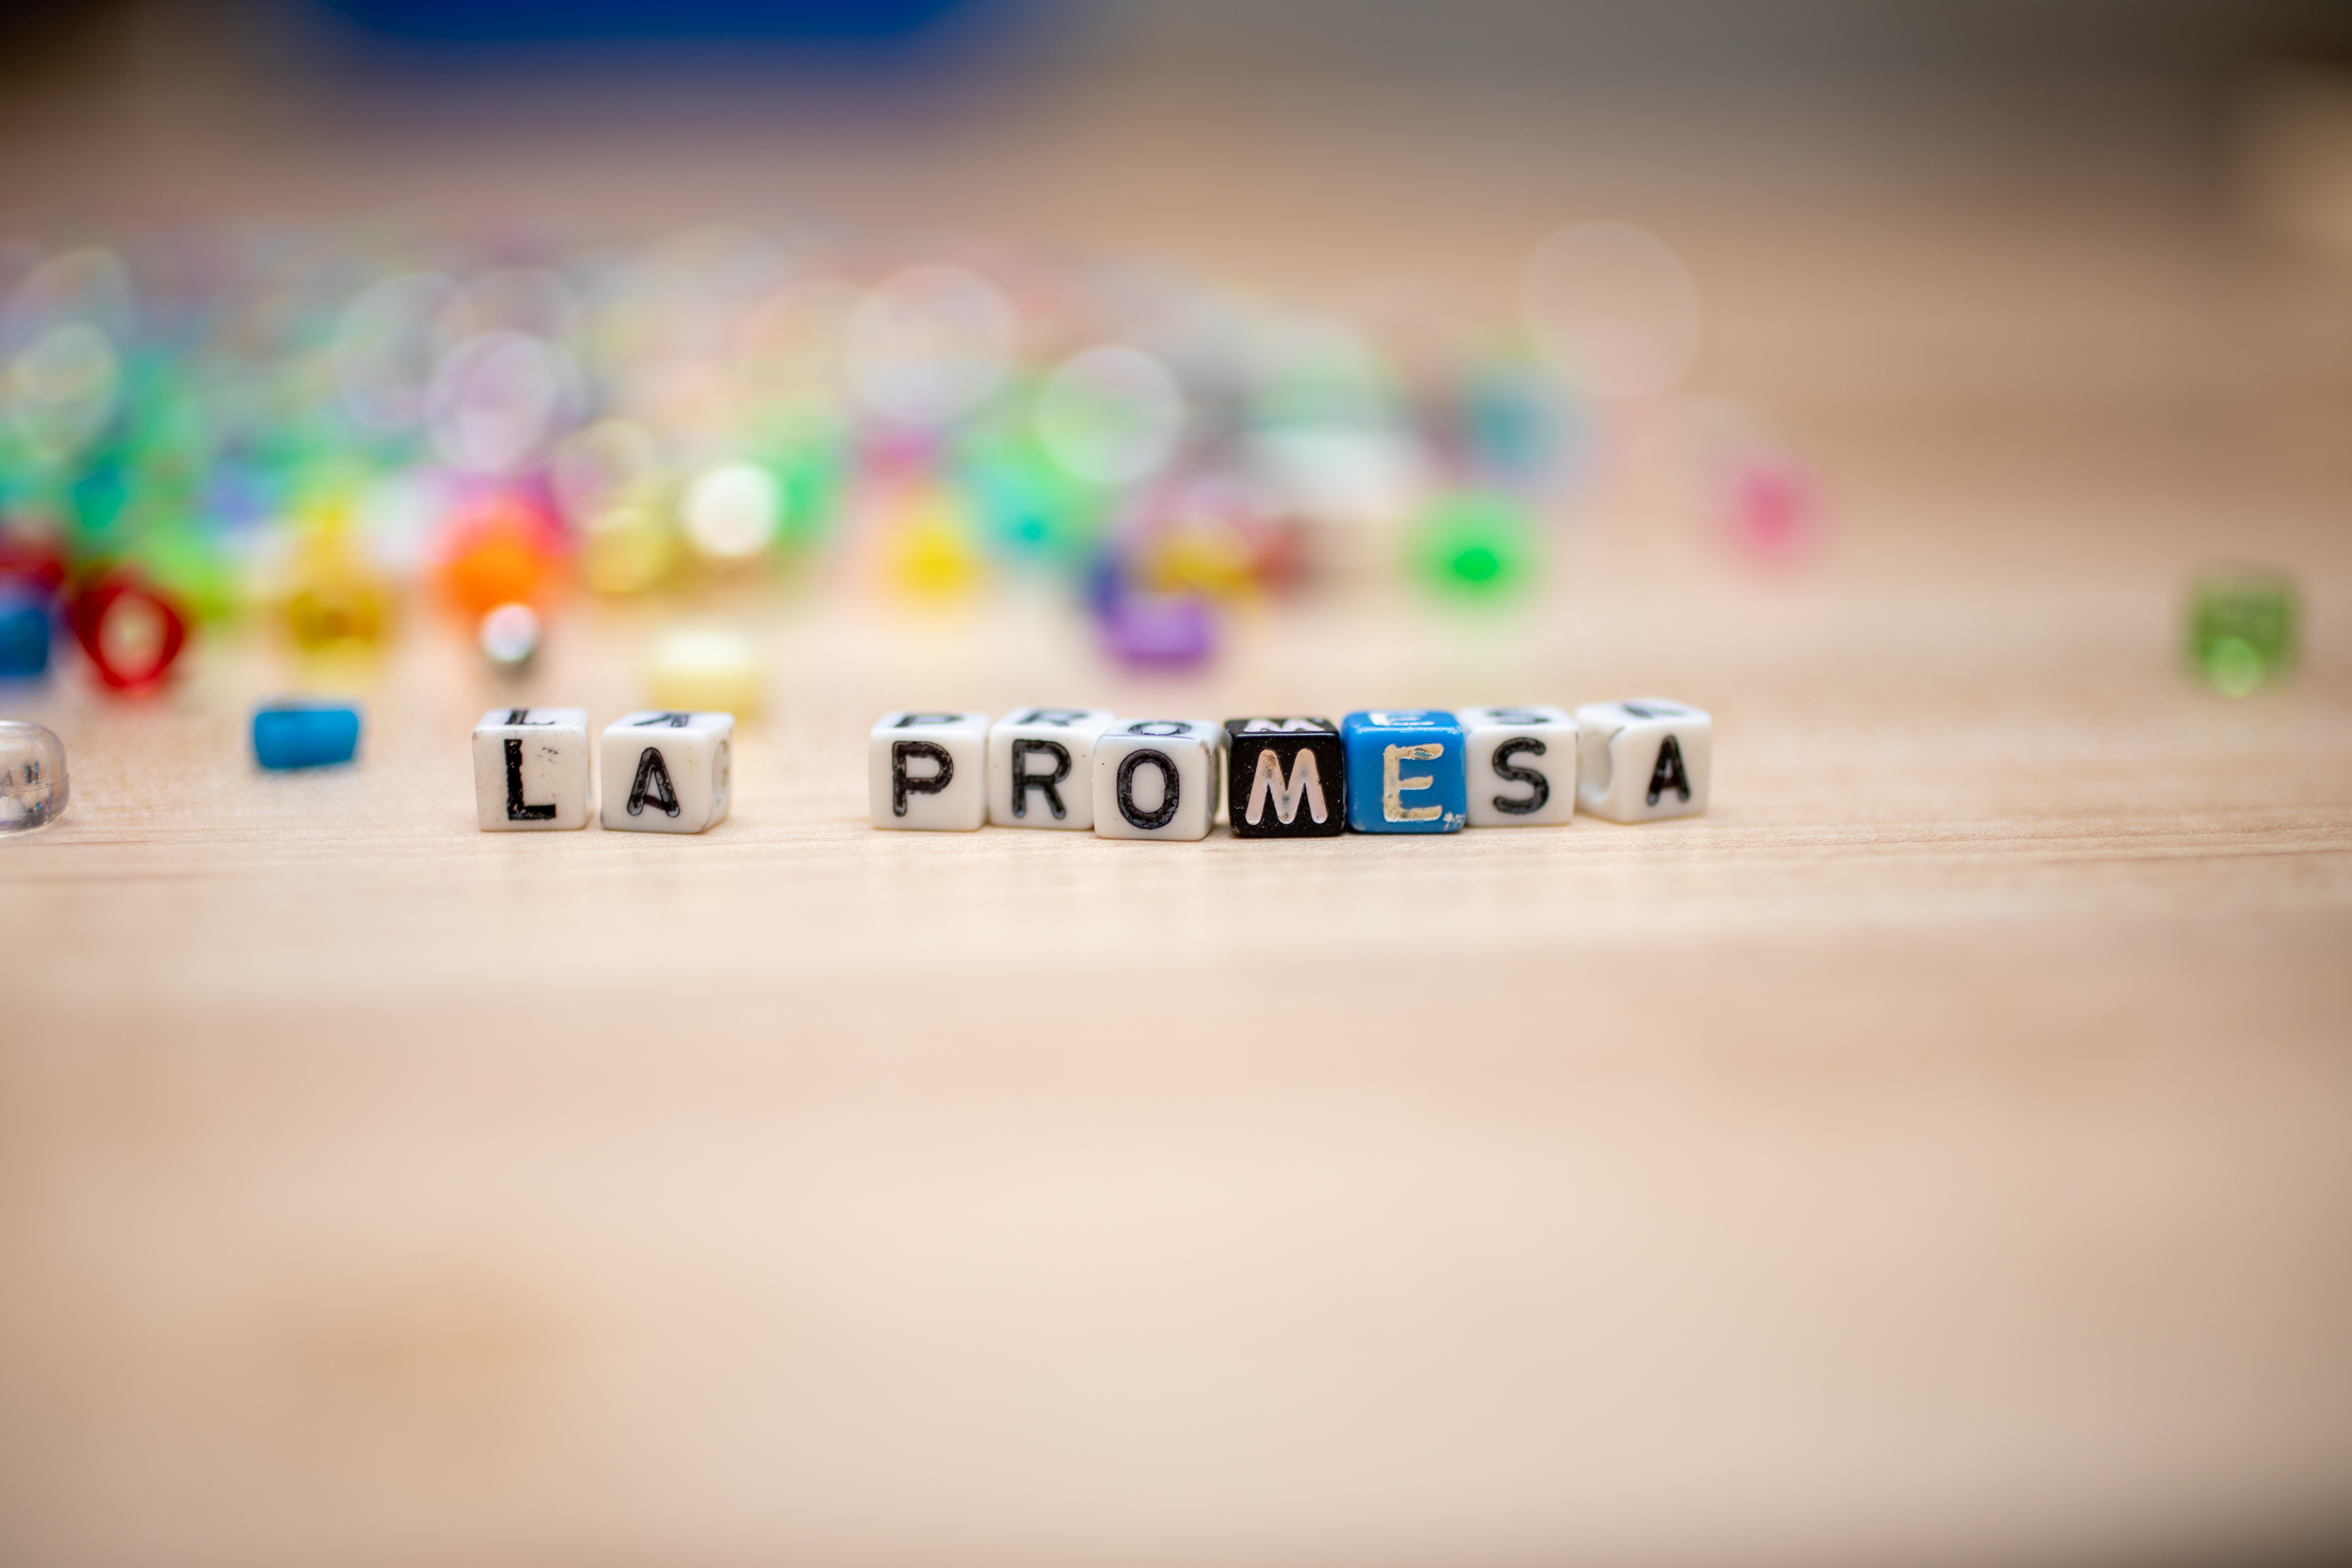 Beads that spell out La Promesa